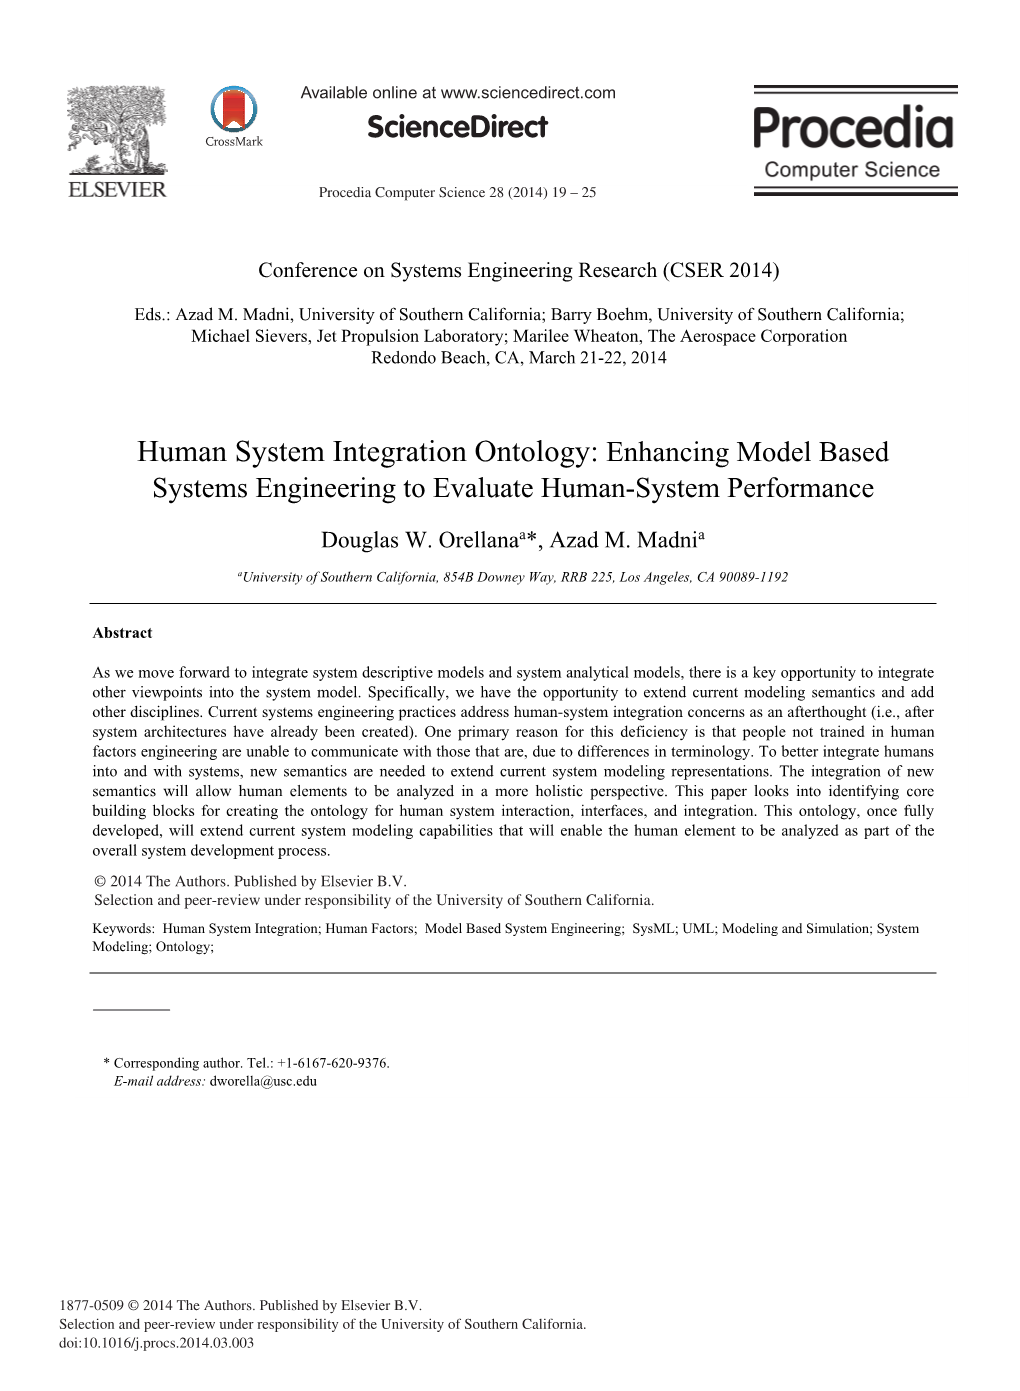 Enhancing Model Based Systems Engineering to Evaluate Human-System Performance